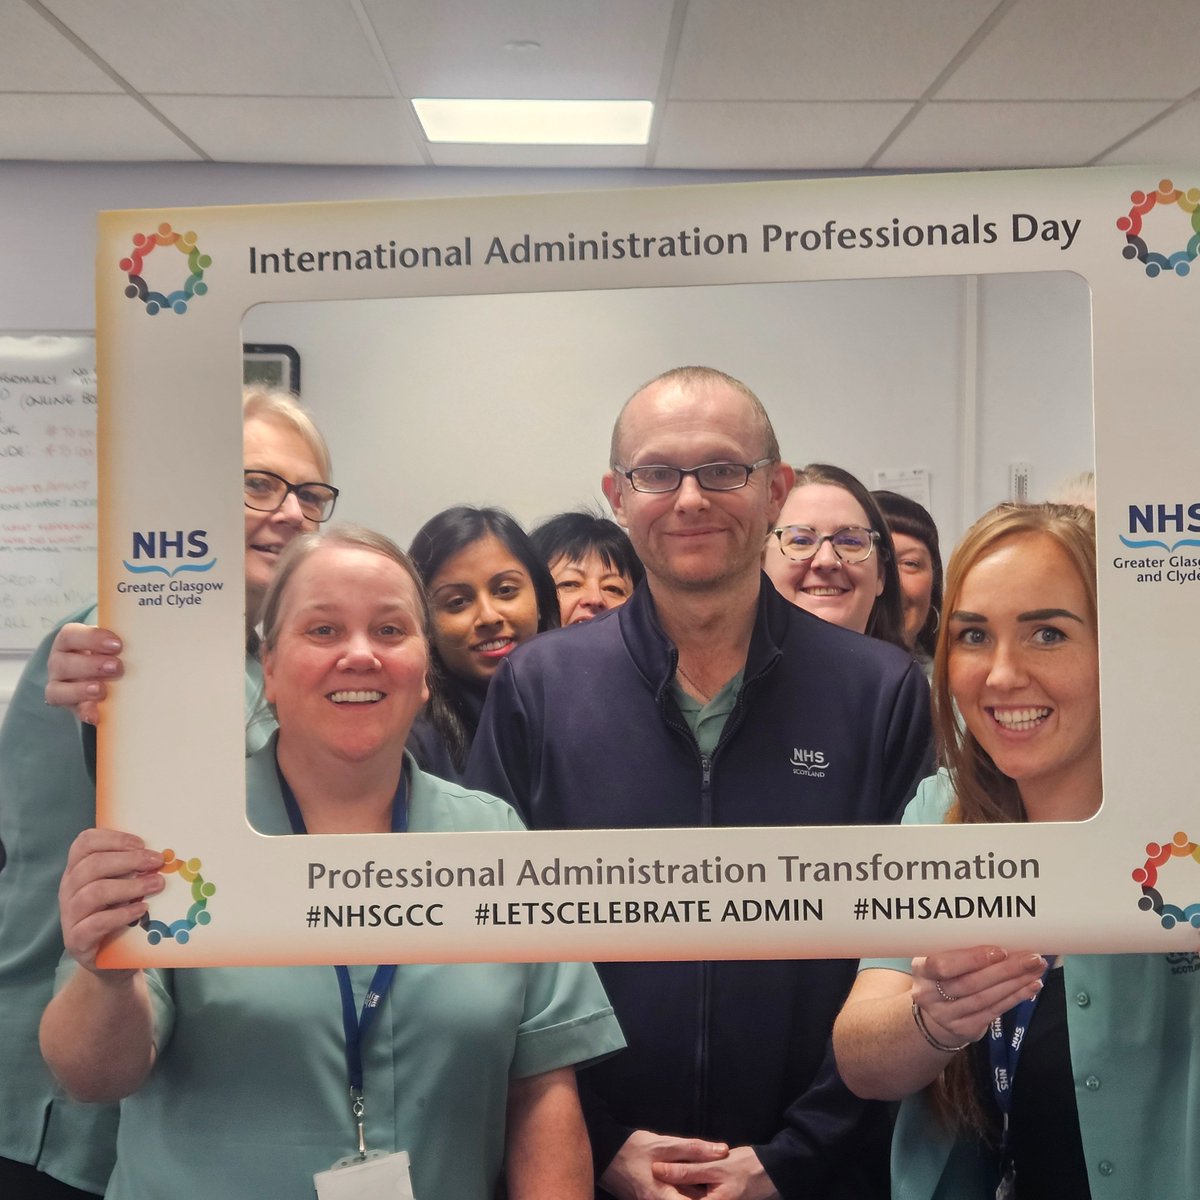 Today is Administrative Professionals Day! It's a special day to recognise and appreciate the hard work and dedication of NHSGGC administrative staff. Thank you for all that you do to keep things running smoothly and make a difference in your role.